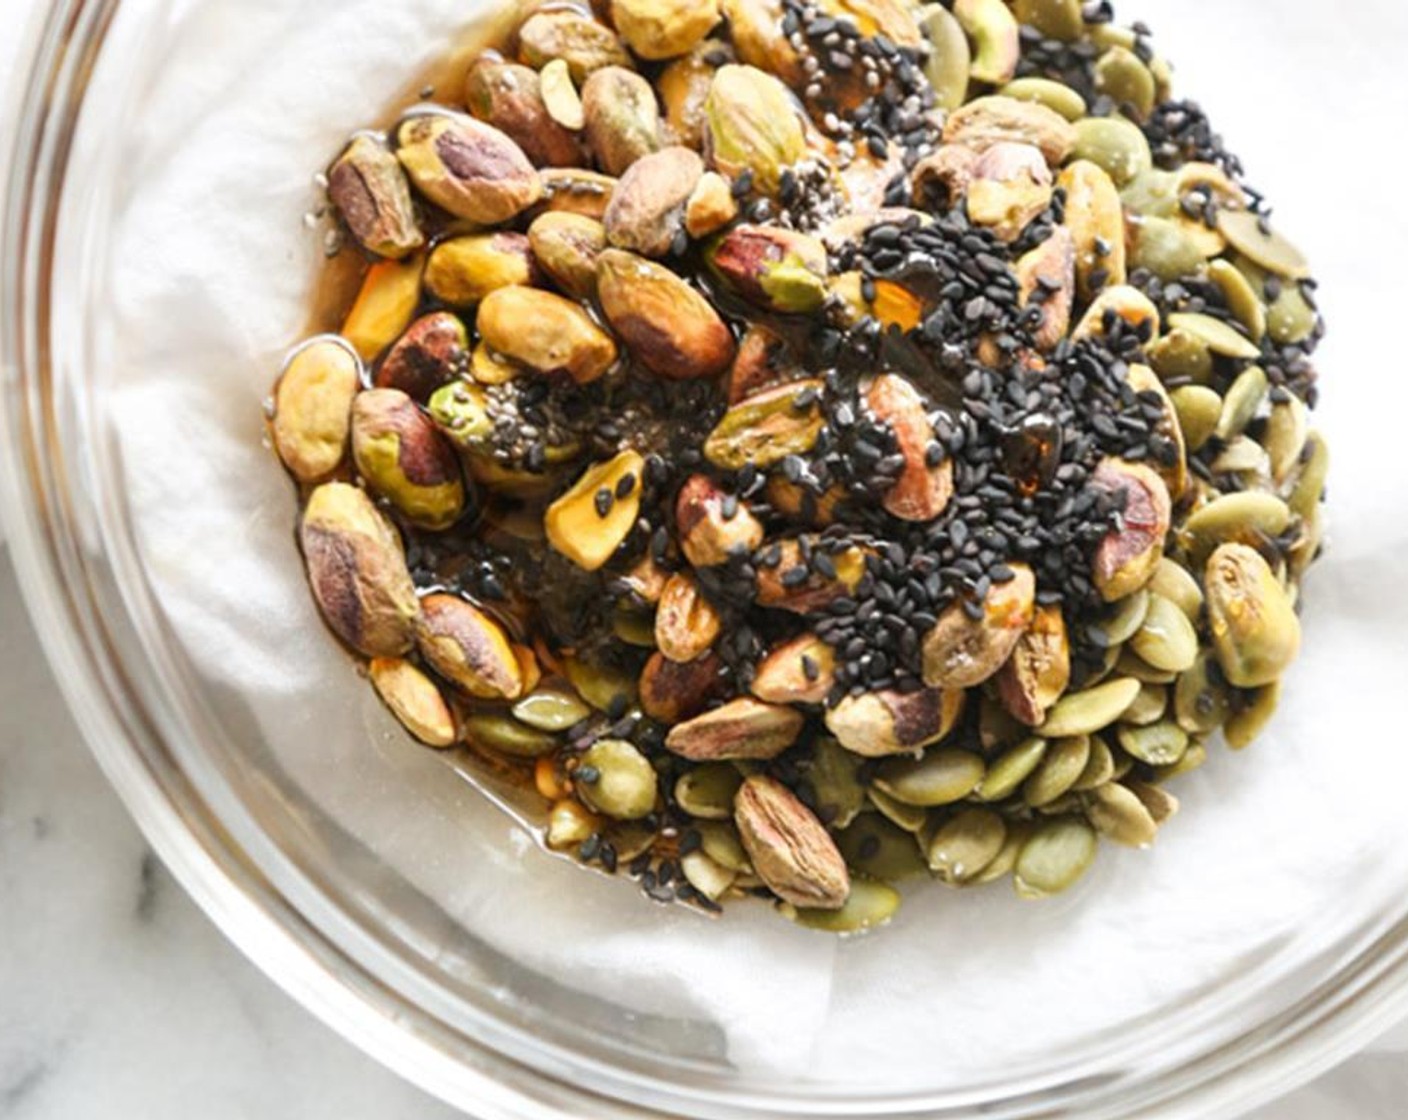 step 2 In a medium mixing bowl, combine the Pepitas (1/2 cup), Pistachios (1/2 cup), Chia Seeds (1 Tbsp), Black Sesame Seeds (1 Tbsp), Maple Syrup (2 Tbsp), Coconut Oil (1 tsp) and Sea Salt (1/4 tsp), and toss until evenly coated.